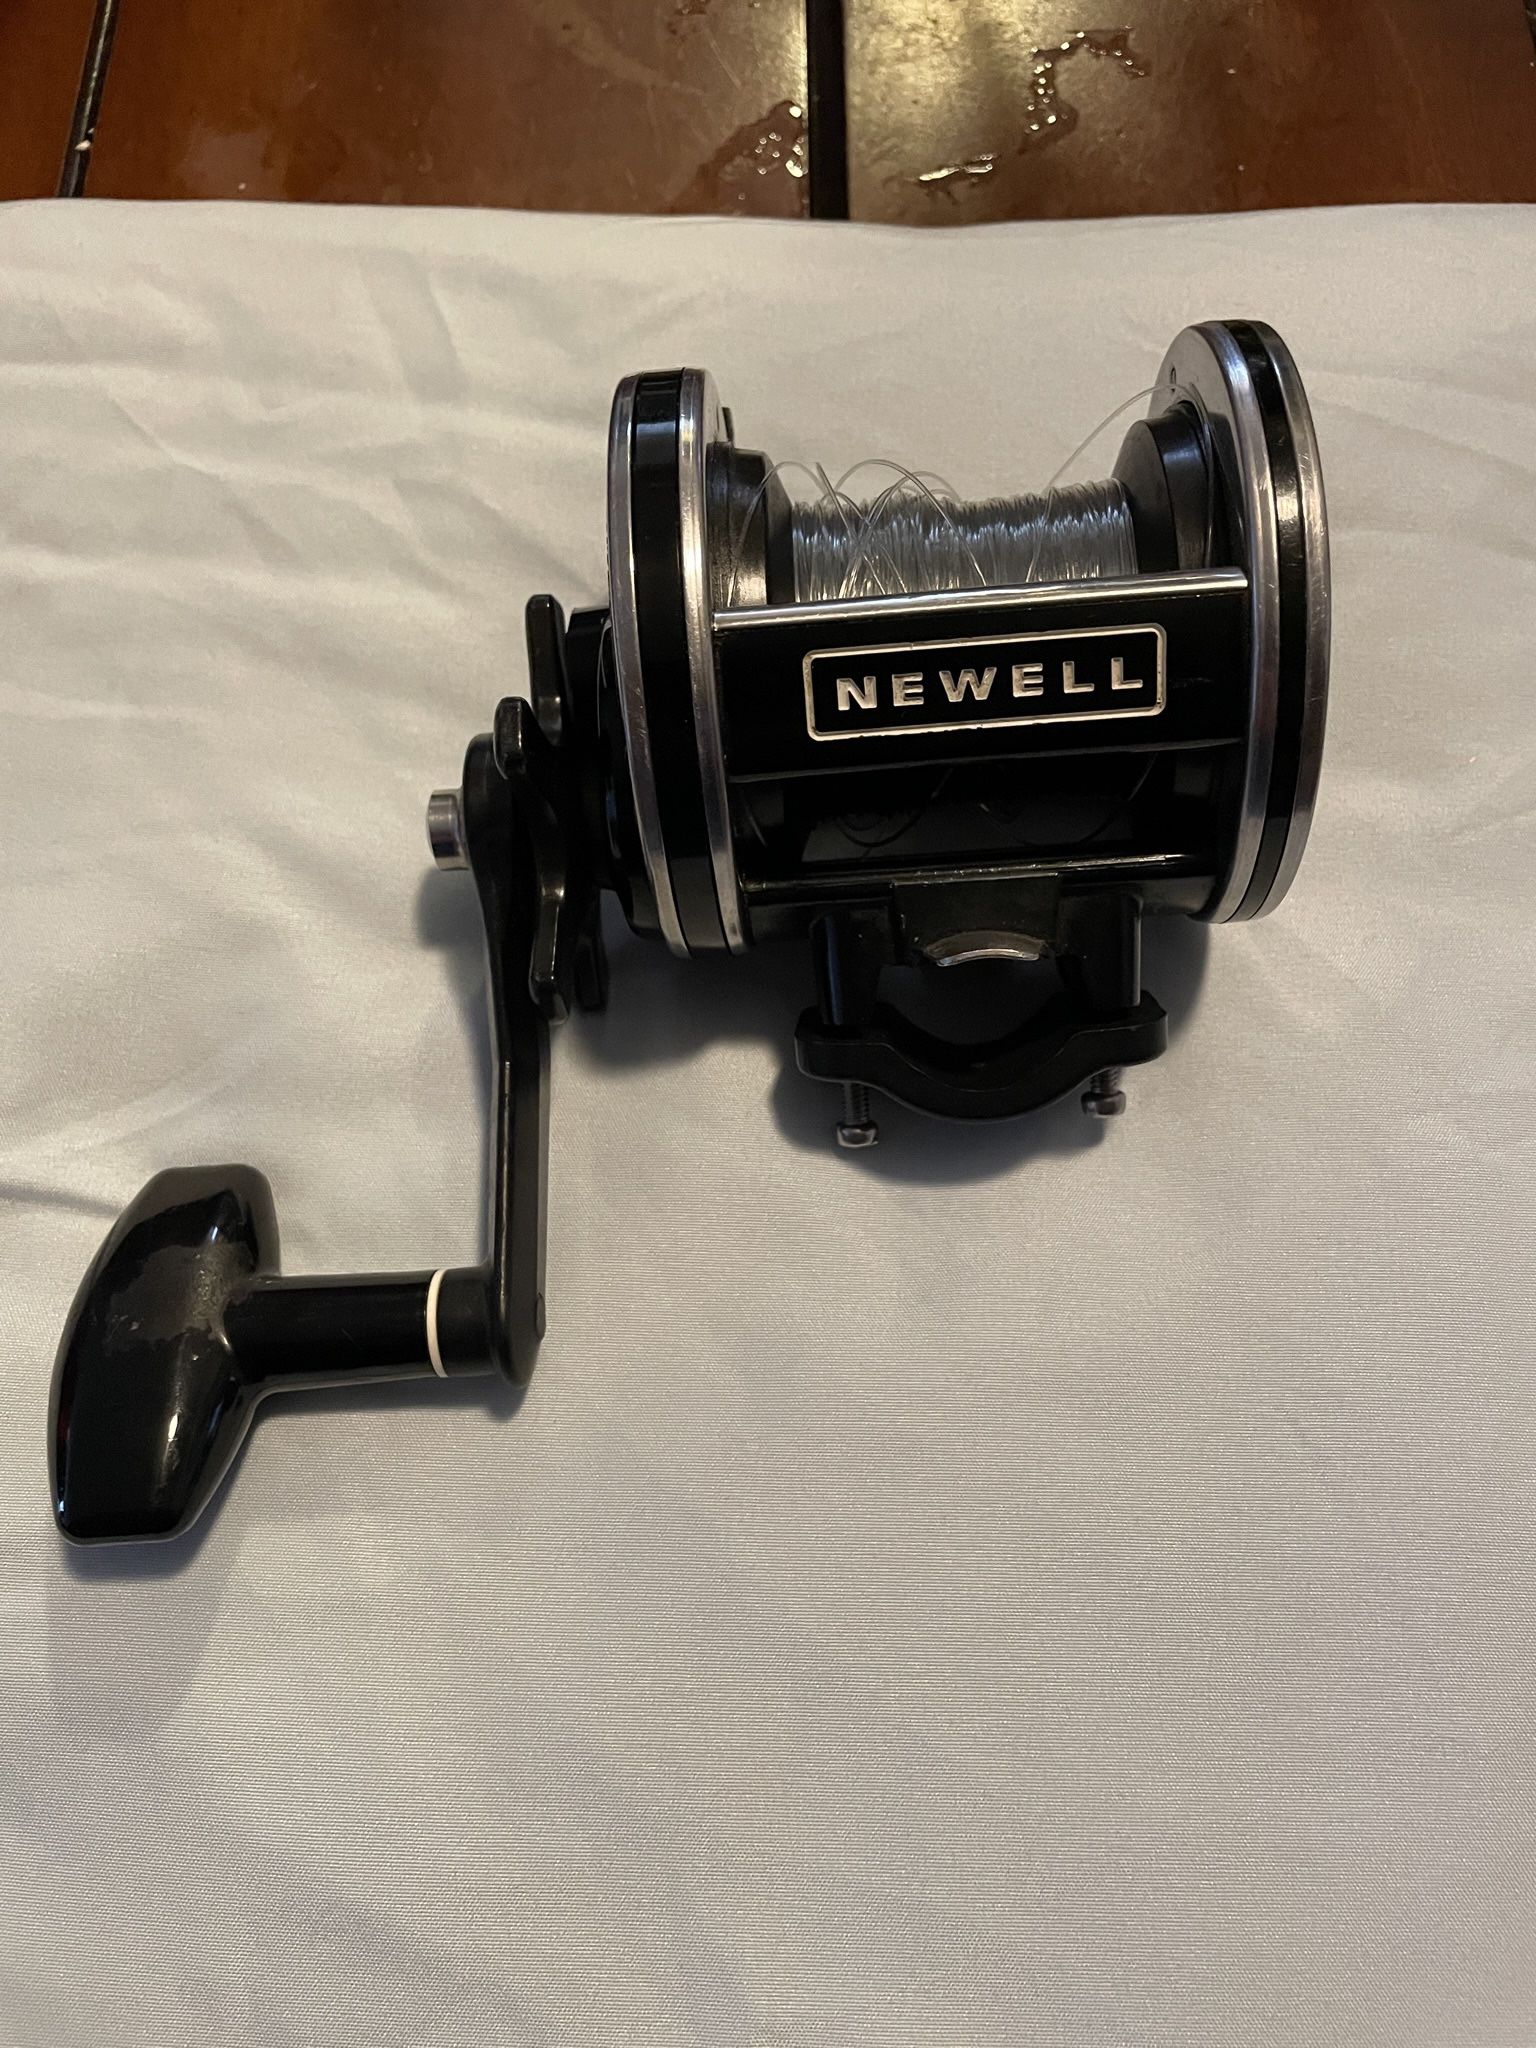 Newell 338-5 for Sale in Chula Vista, CA - OfferUp